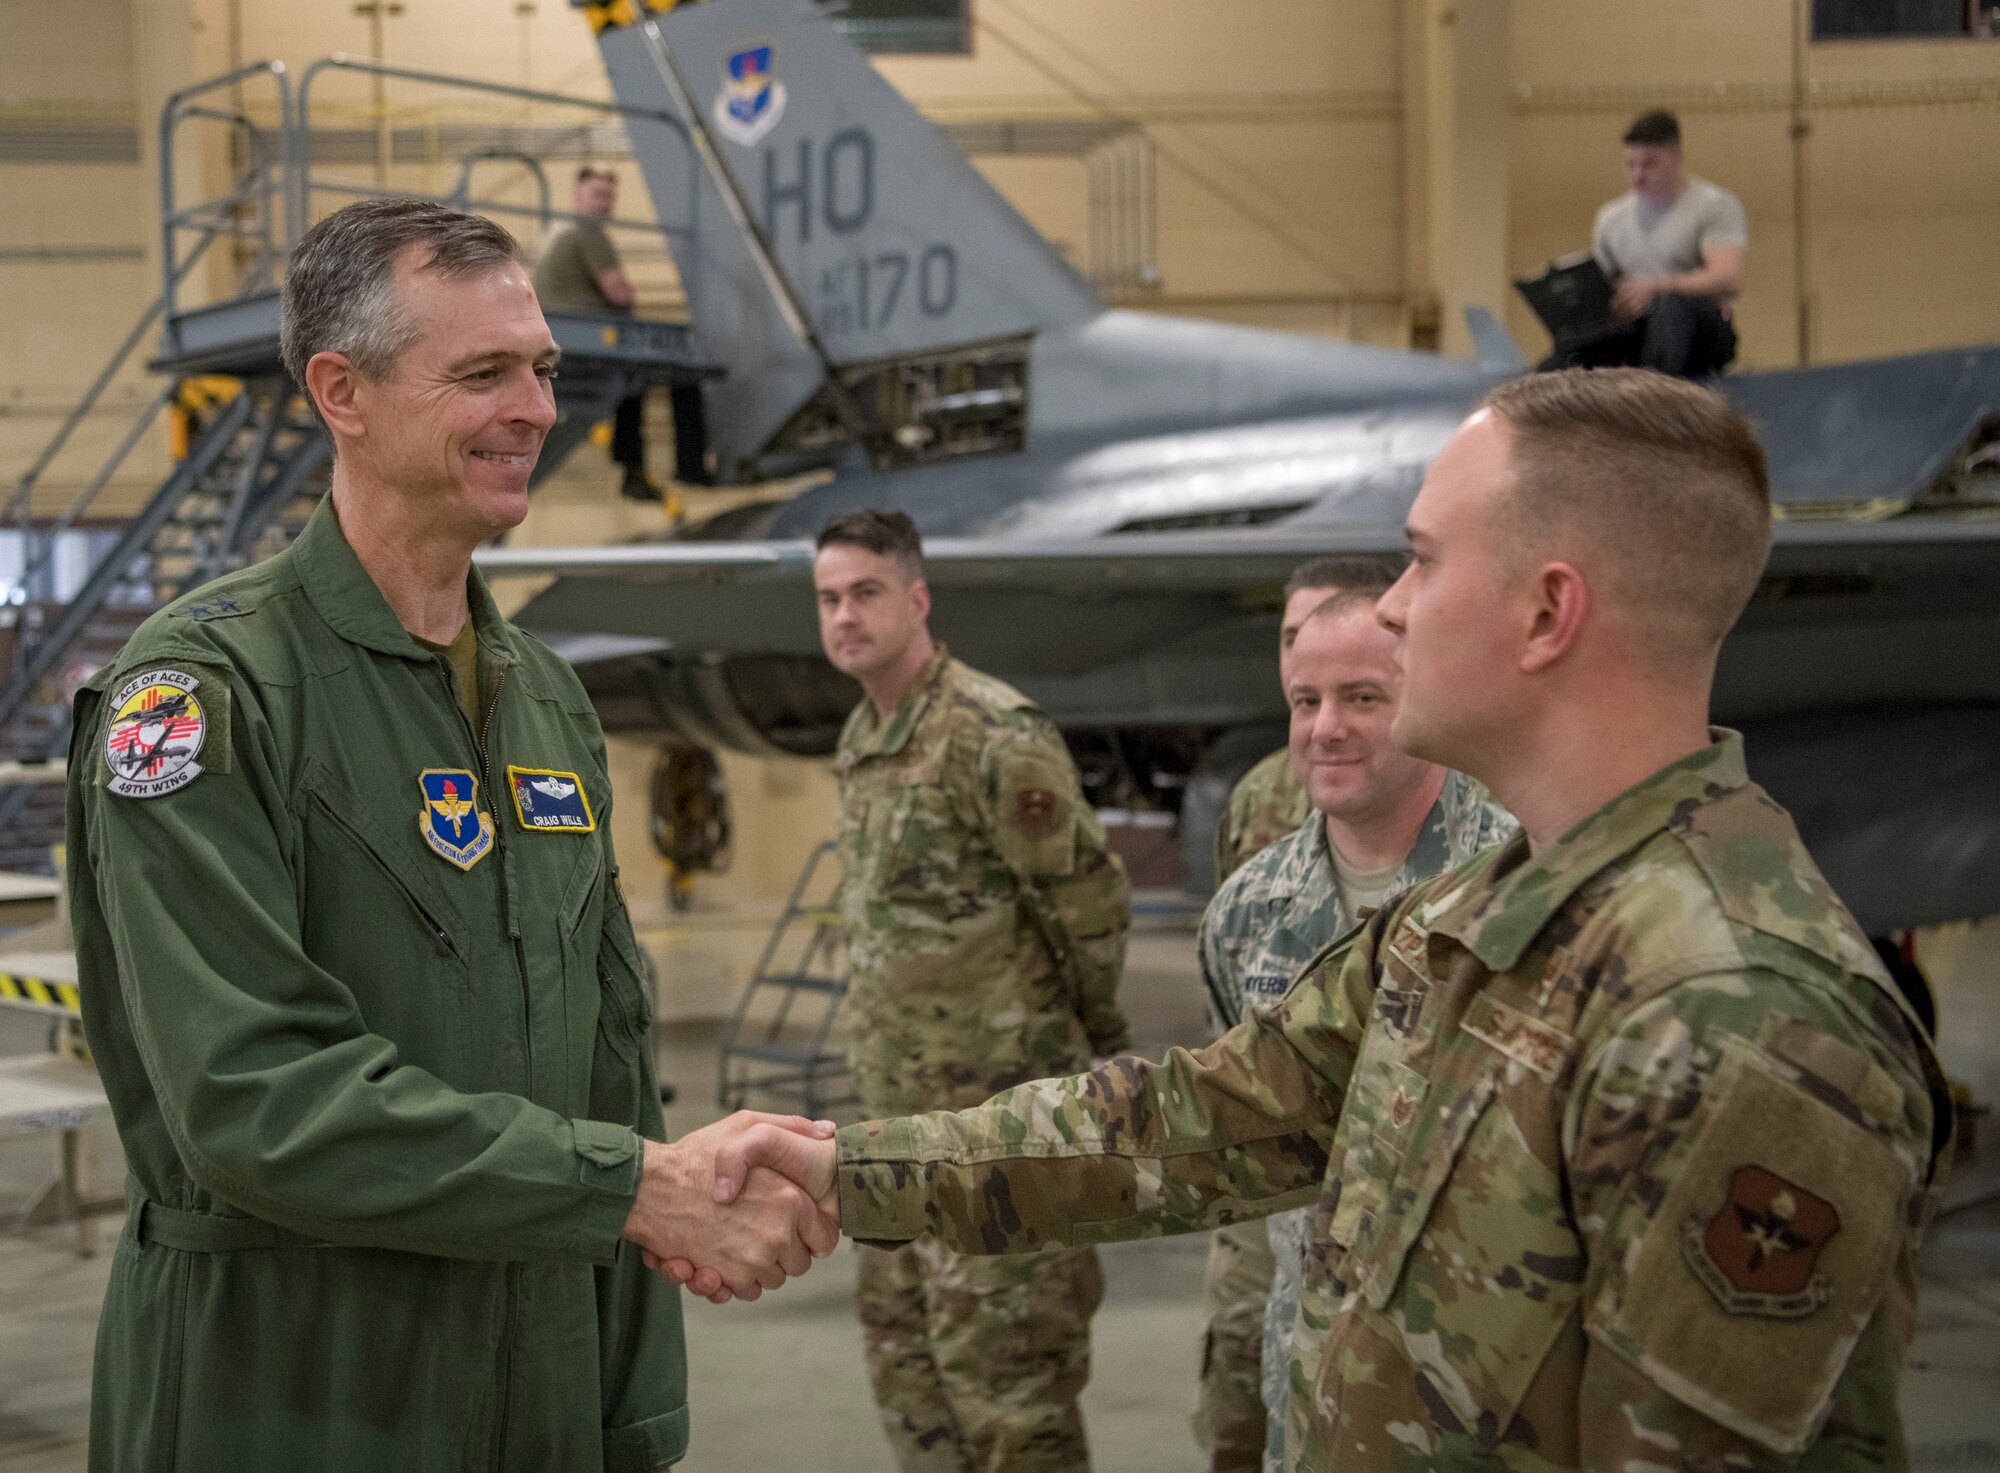 Maj. Gen. Craig Wills, left, 19th Air Force commander, greets a 49th Maintenance Group Airman, Feb. 14, 2020, on Holloman Air Force Base, N.M. The 19th AF command team toured 49th Wing facilities, focusing on recognizing Airmen who have made a substantial impact on the Holloman mission. (U.S. Air Force photo by Airman 1st Class Quion Lowe)